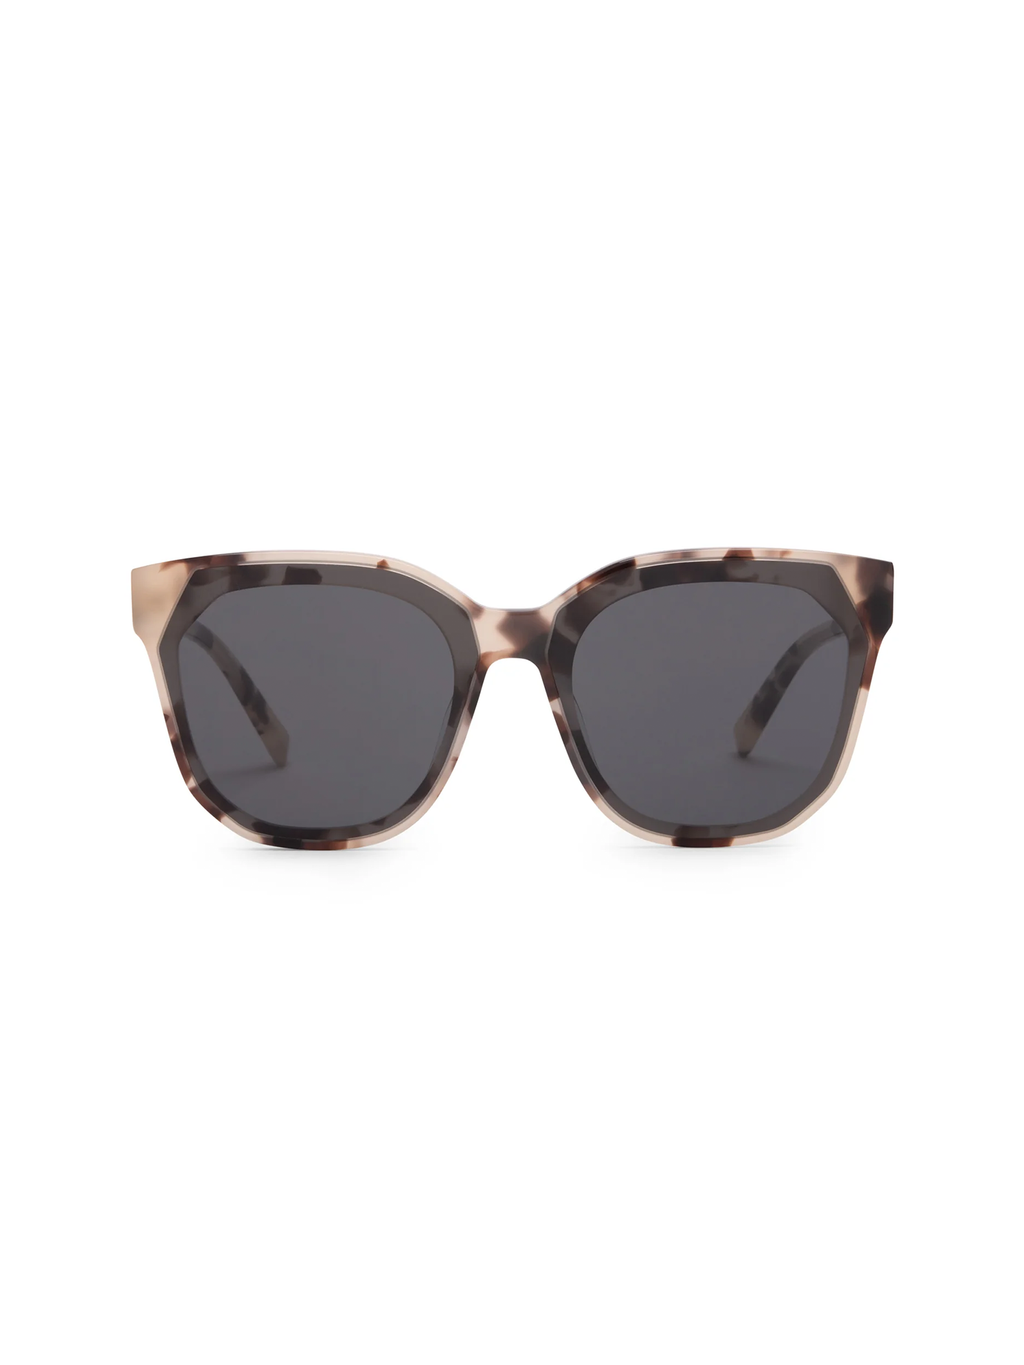 Gia Sunnies in Tort/Grey - Stitch And Feather